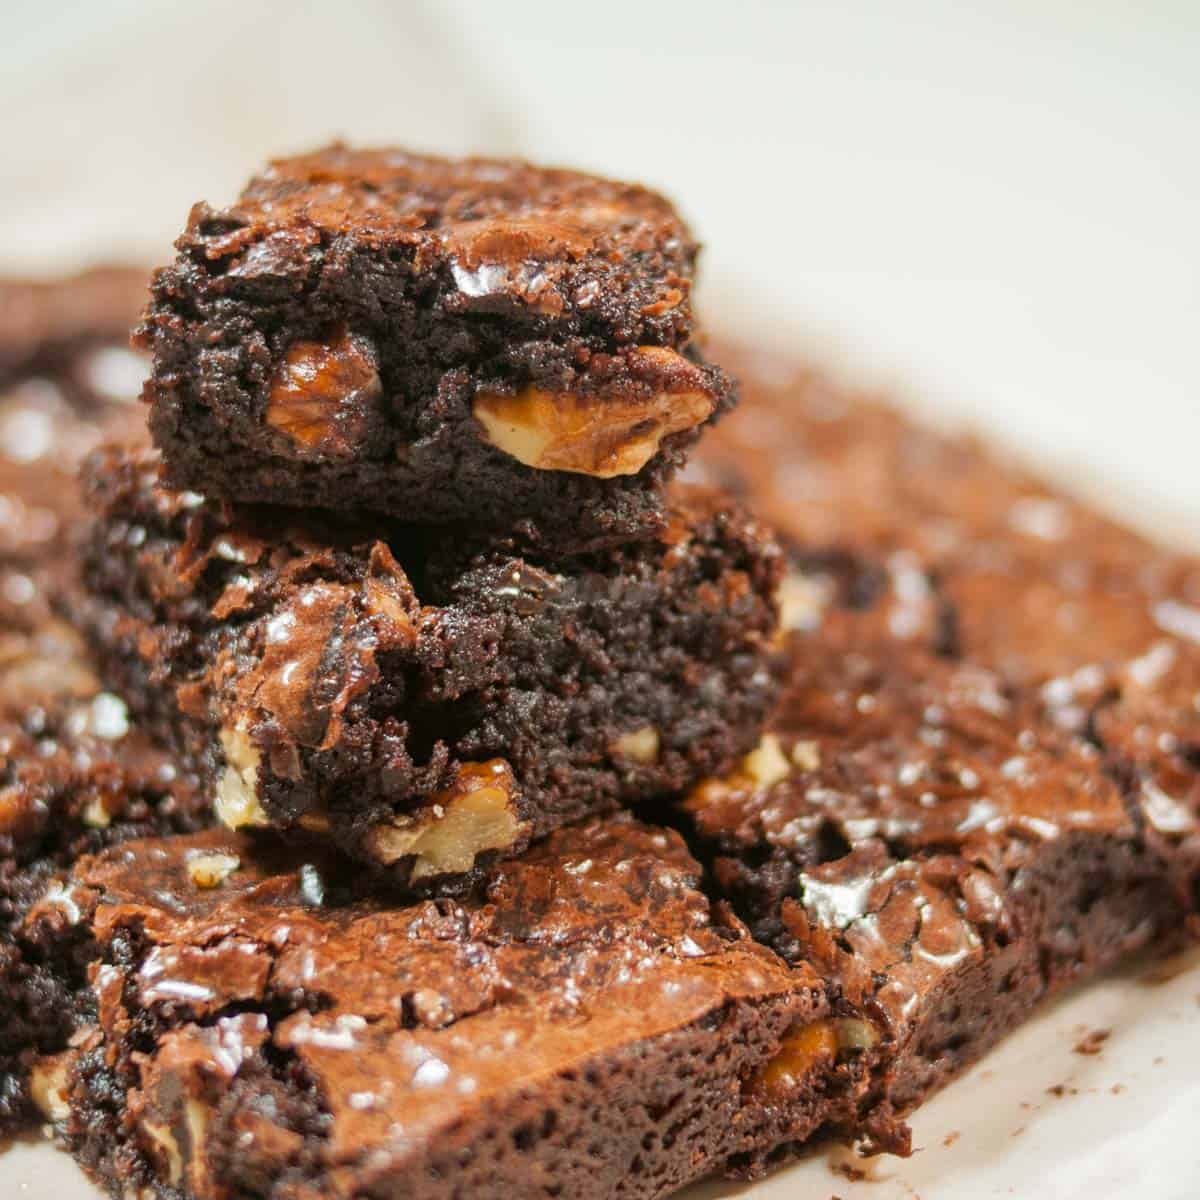 A close shot of side view of Chocolate brownie showing fudgy center and walnuts.